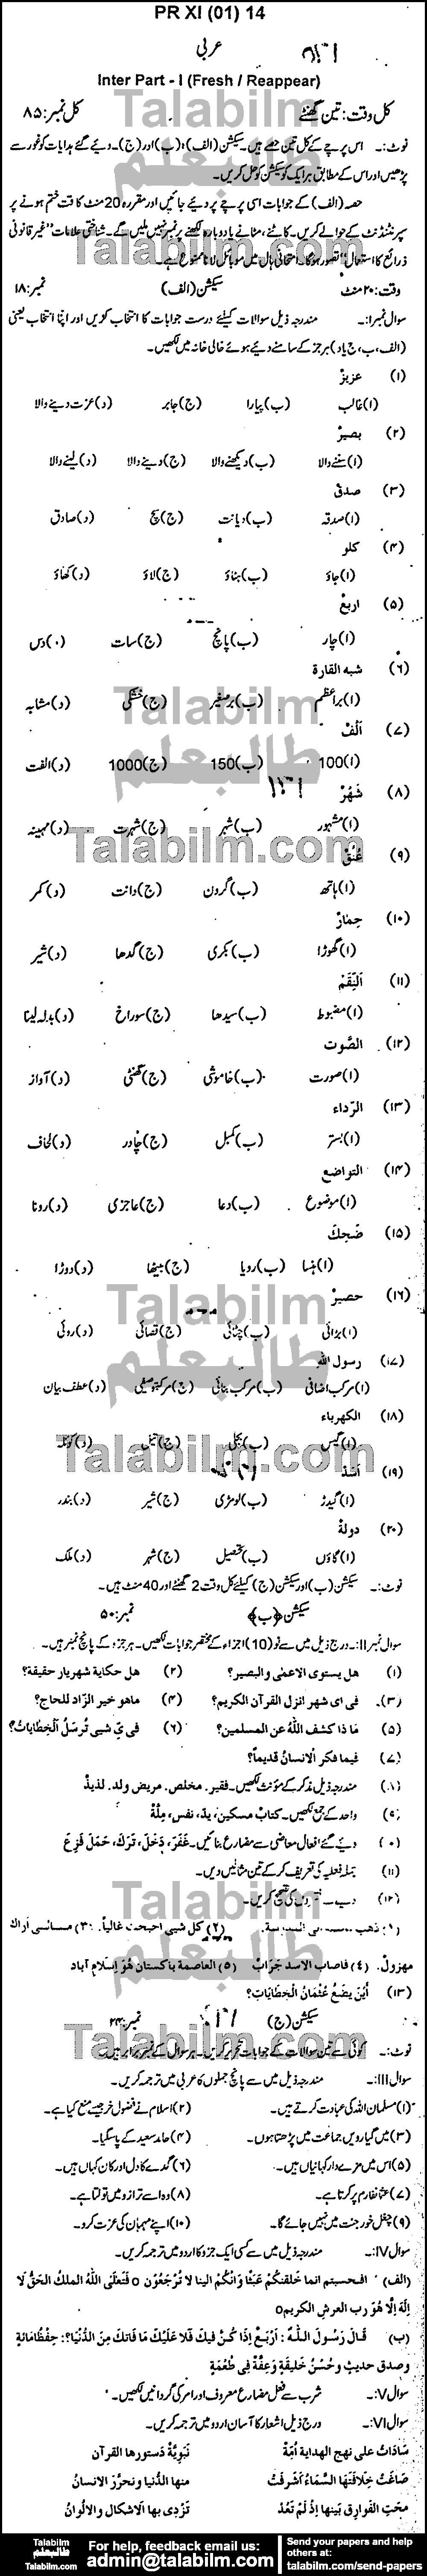 Arabic 0 past paper for Group-I 2014